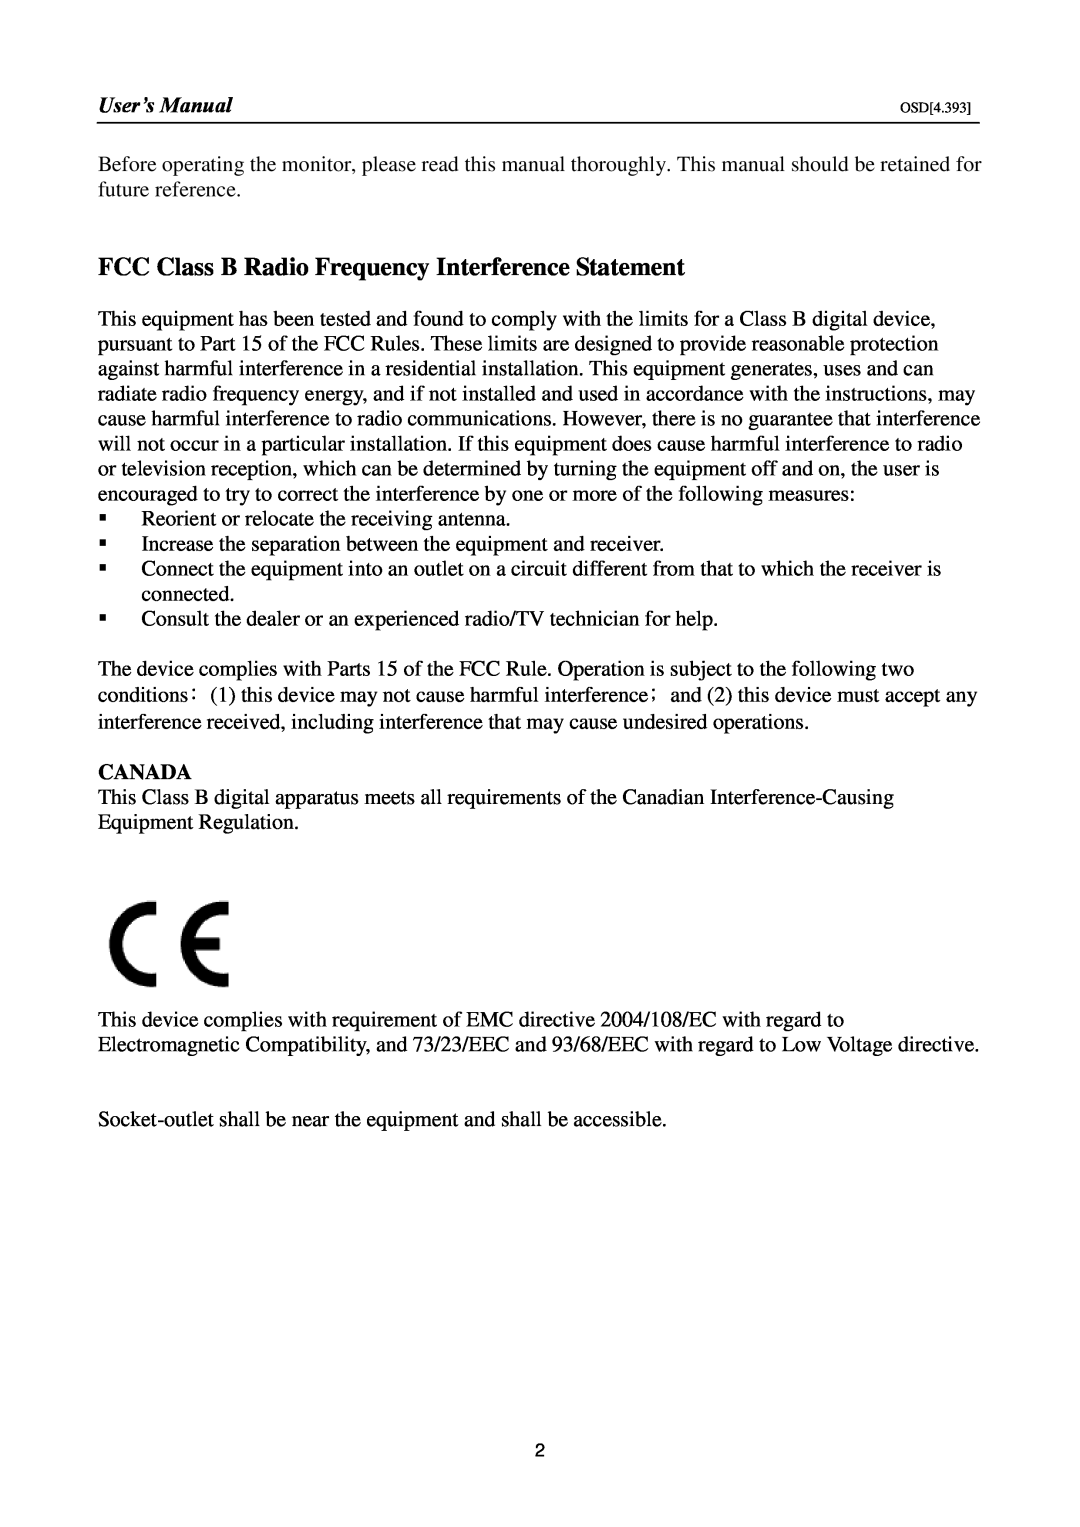 Hanns.G HL195, HSG1145 manual FCC Class B Radio Frequency Interference Statement, User’s Manual, Canada 